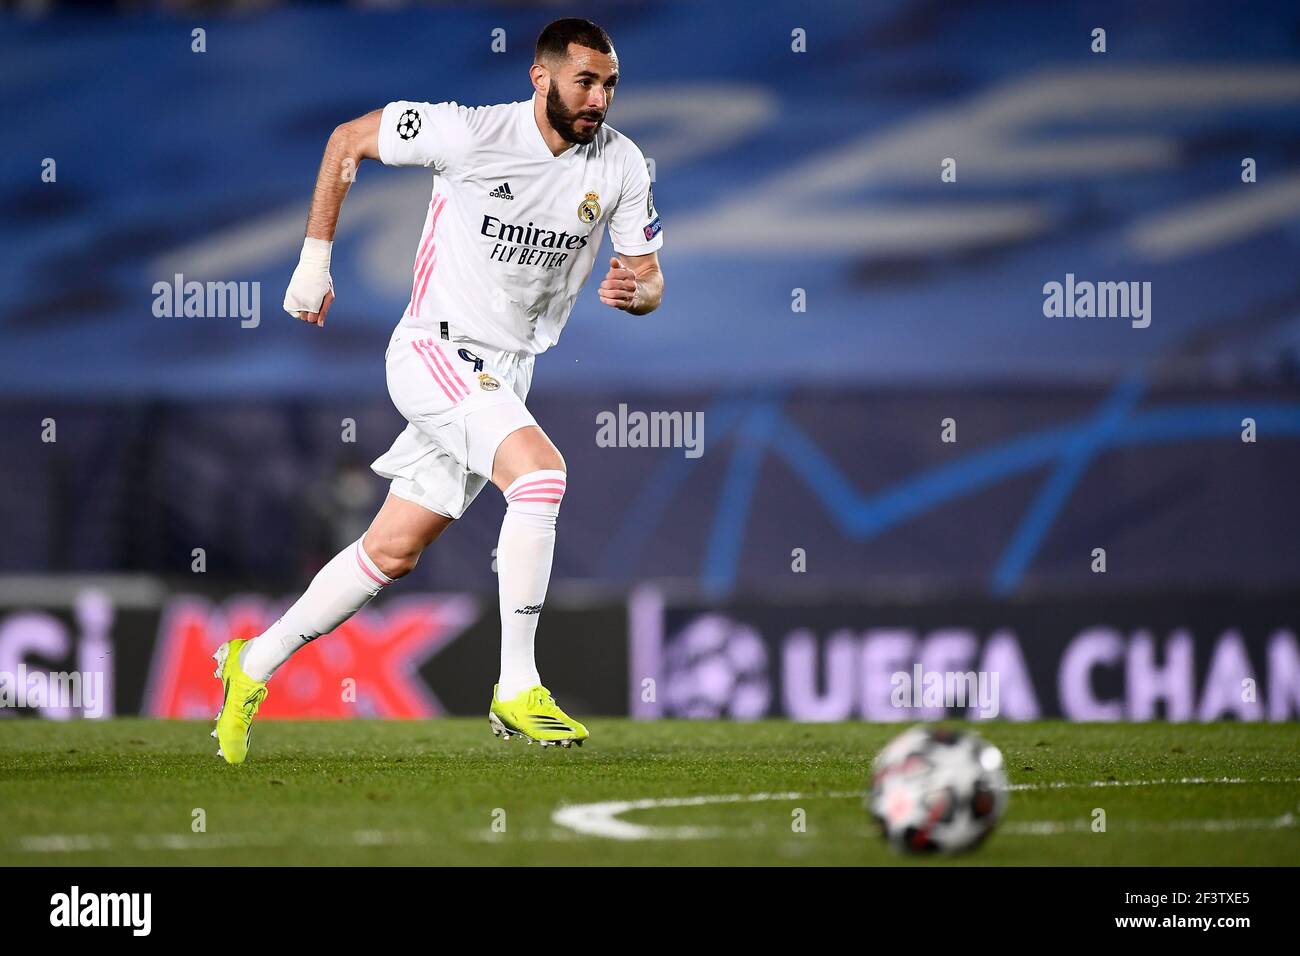 Madrid, Spain - 16 March, 2021: Karim Benzema of Real Madrid CF in action during the UEFA Champions League Round of 16 second leg football match between Real Madrid CF and Atalanta BC. Real Madrid CF won 3-1 over Atalanta BC. Credit: Nicolò Campo/Alamy Live News Stock Photo